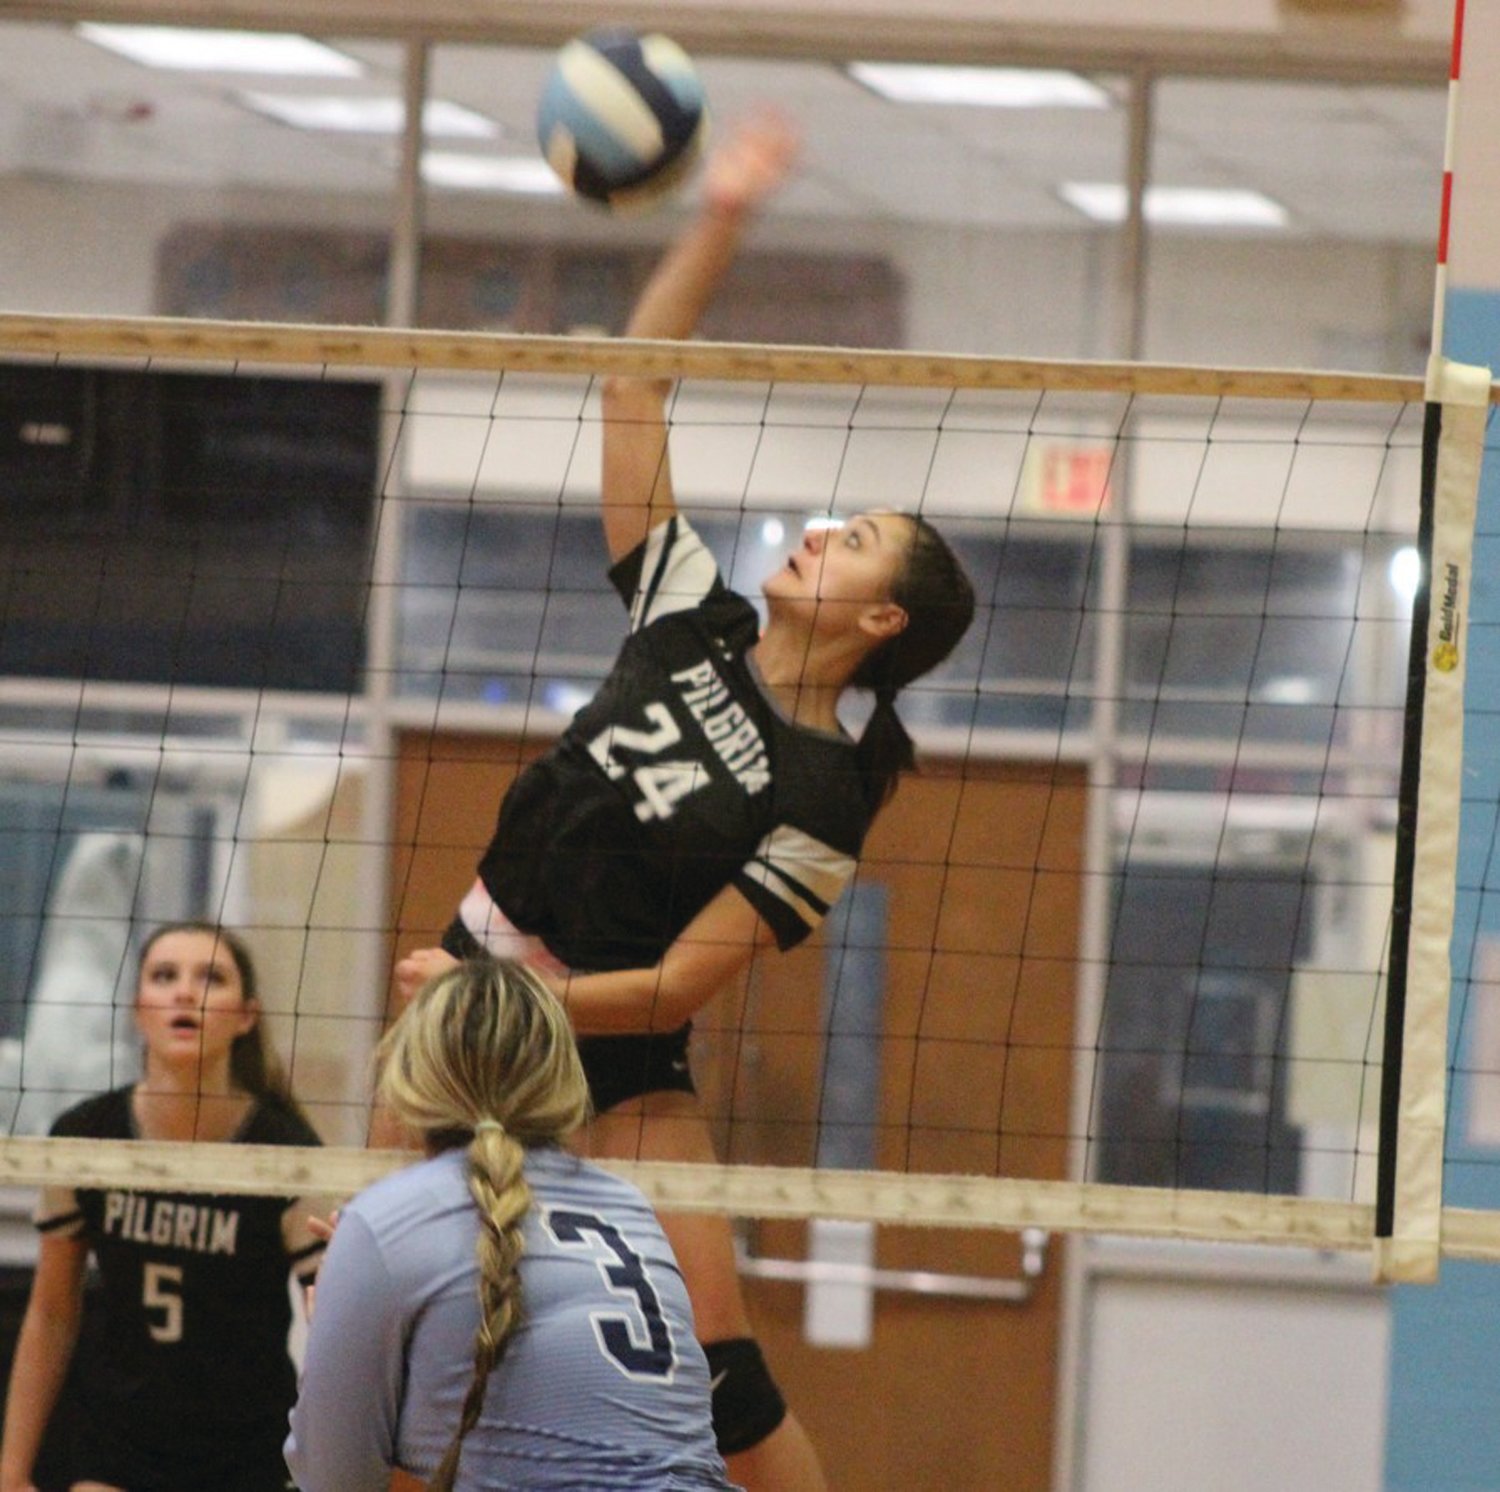 BIG OUTING: Pilgrim’s Kaleigh Catucci makes a play at the net last week.